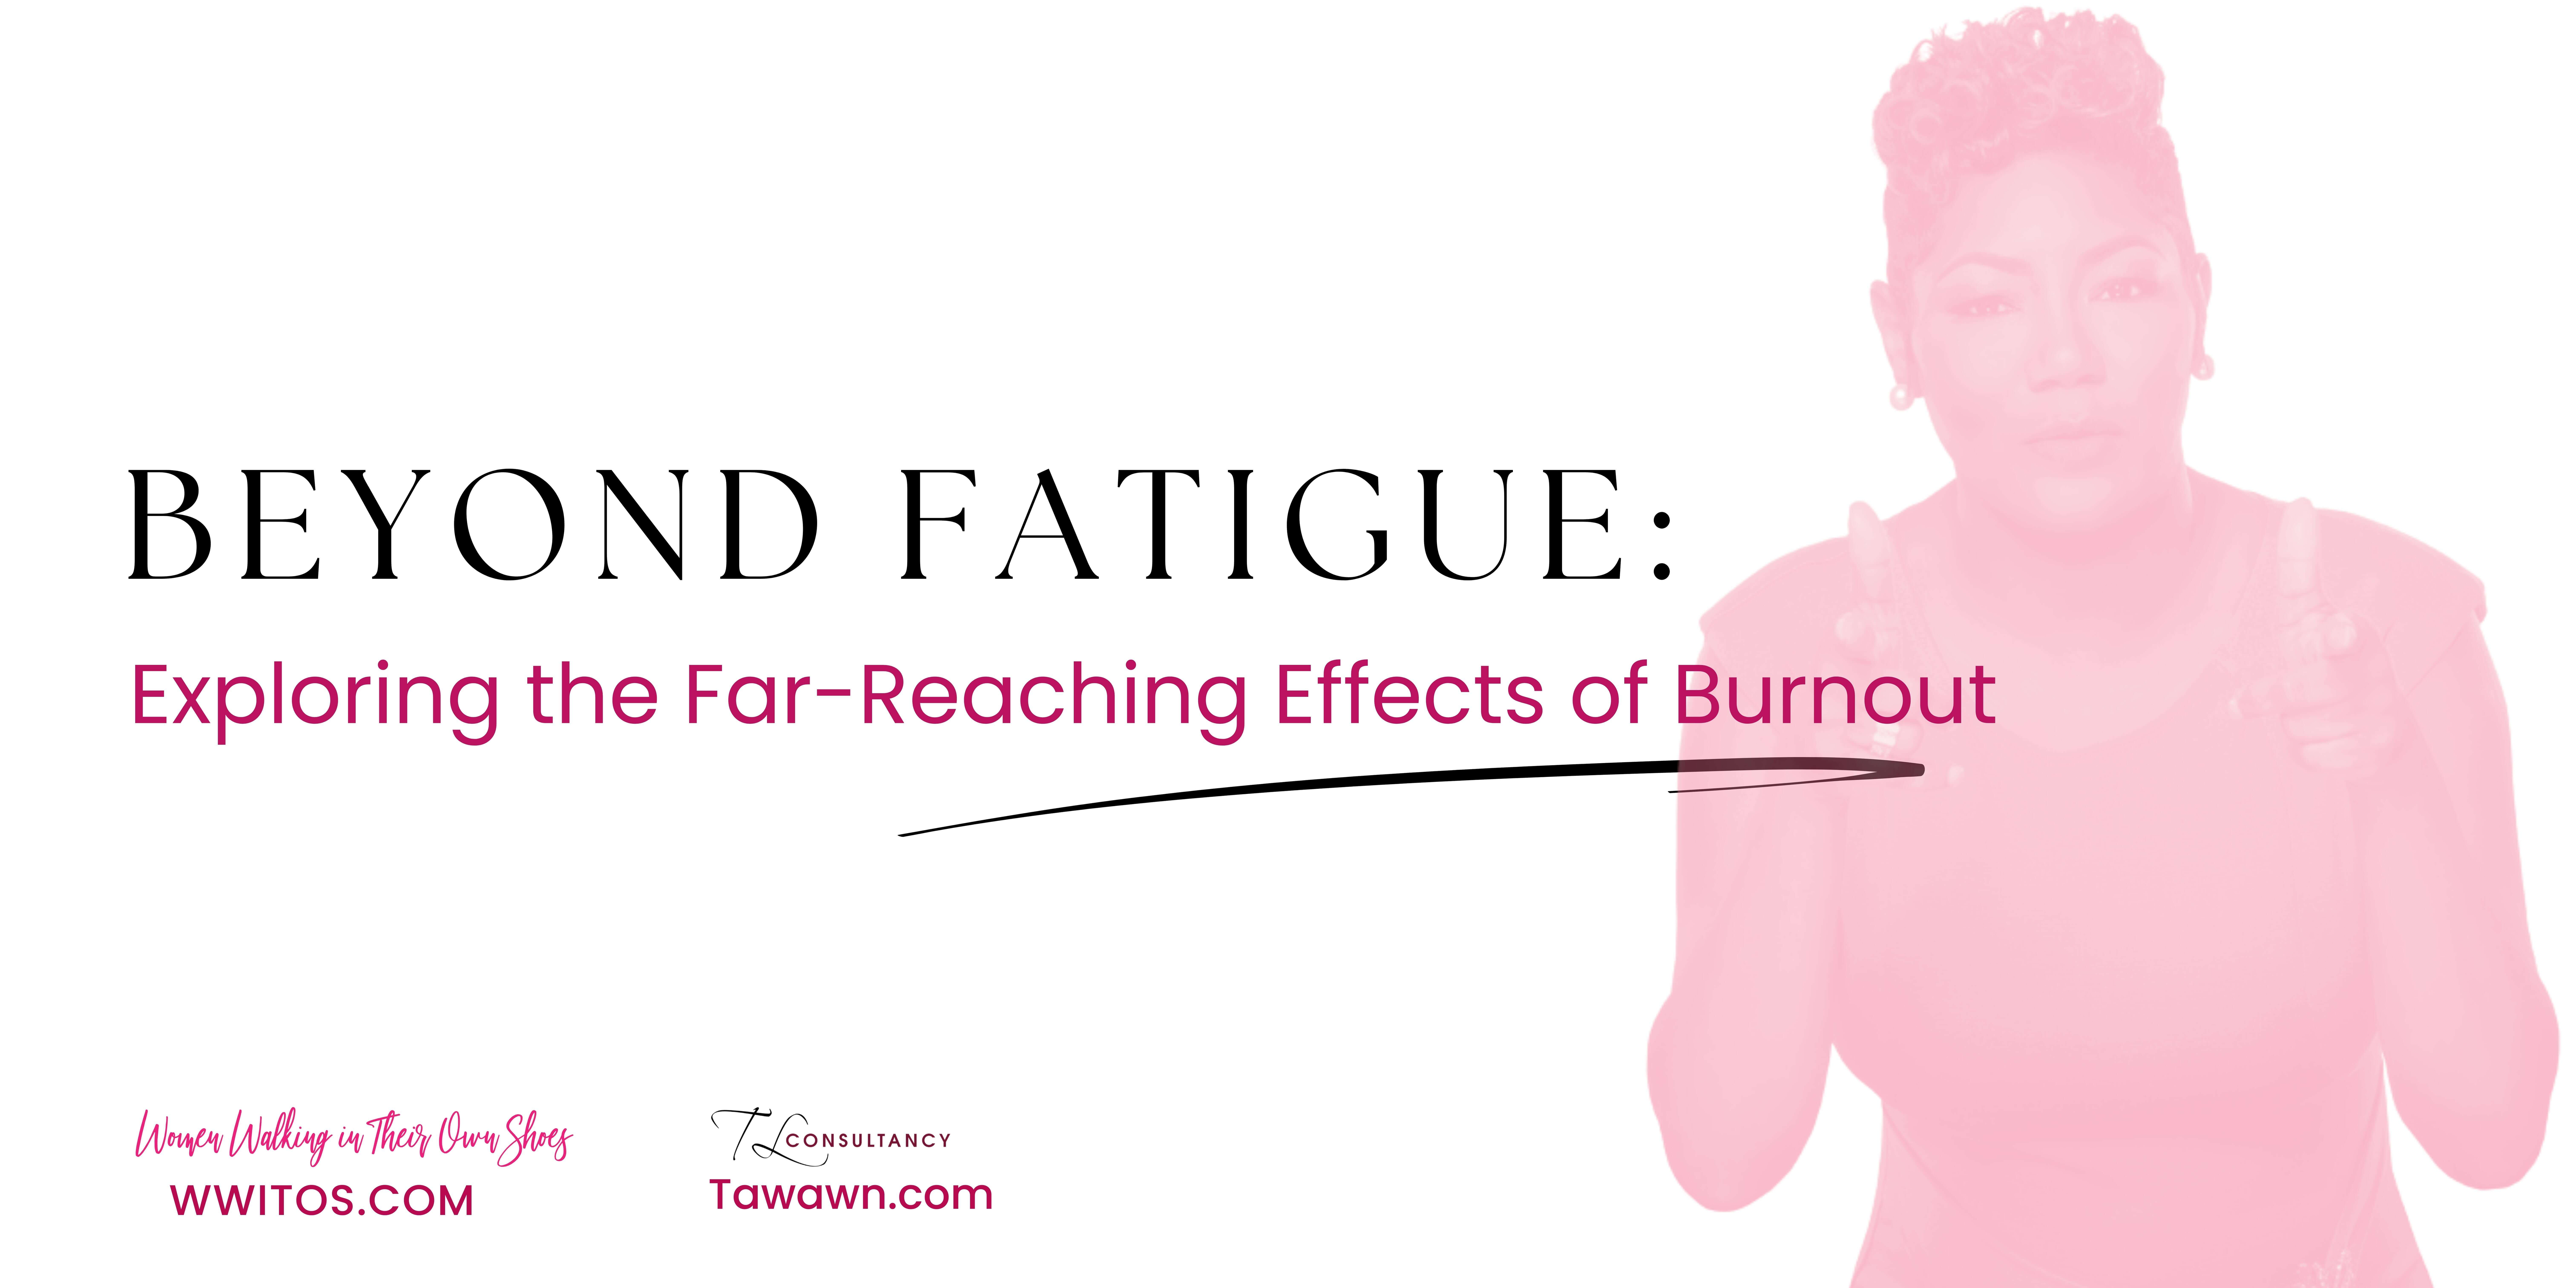 Beyond Fatigue: Exploring the Far-Reaching Effects of Burnout